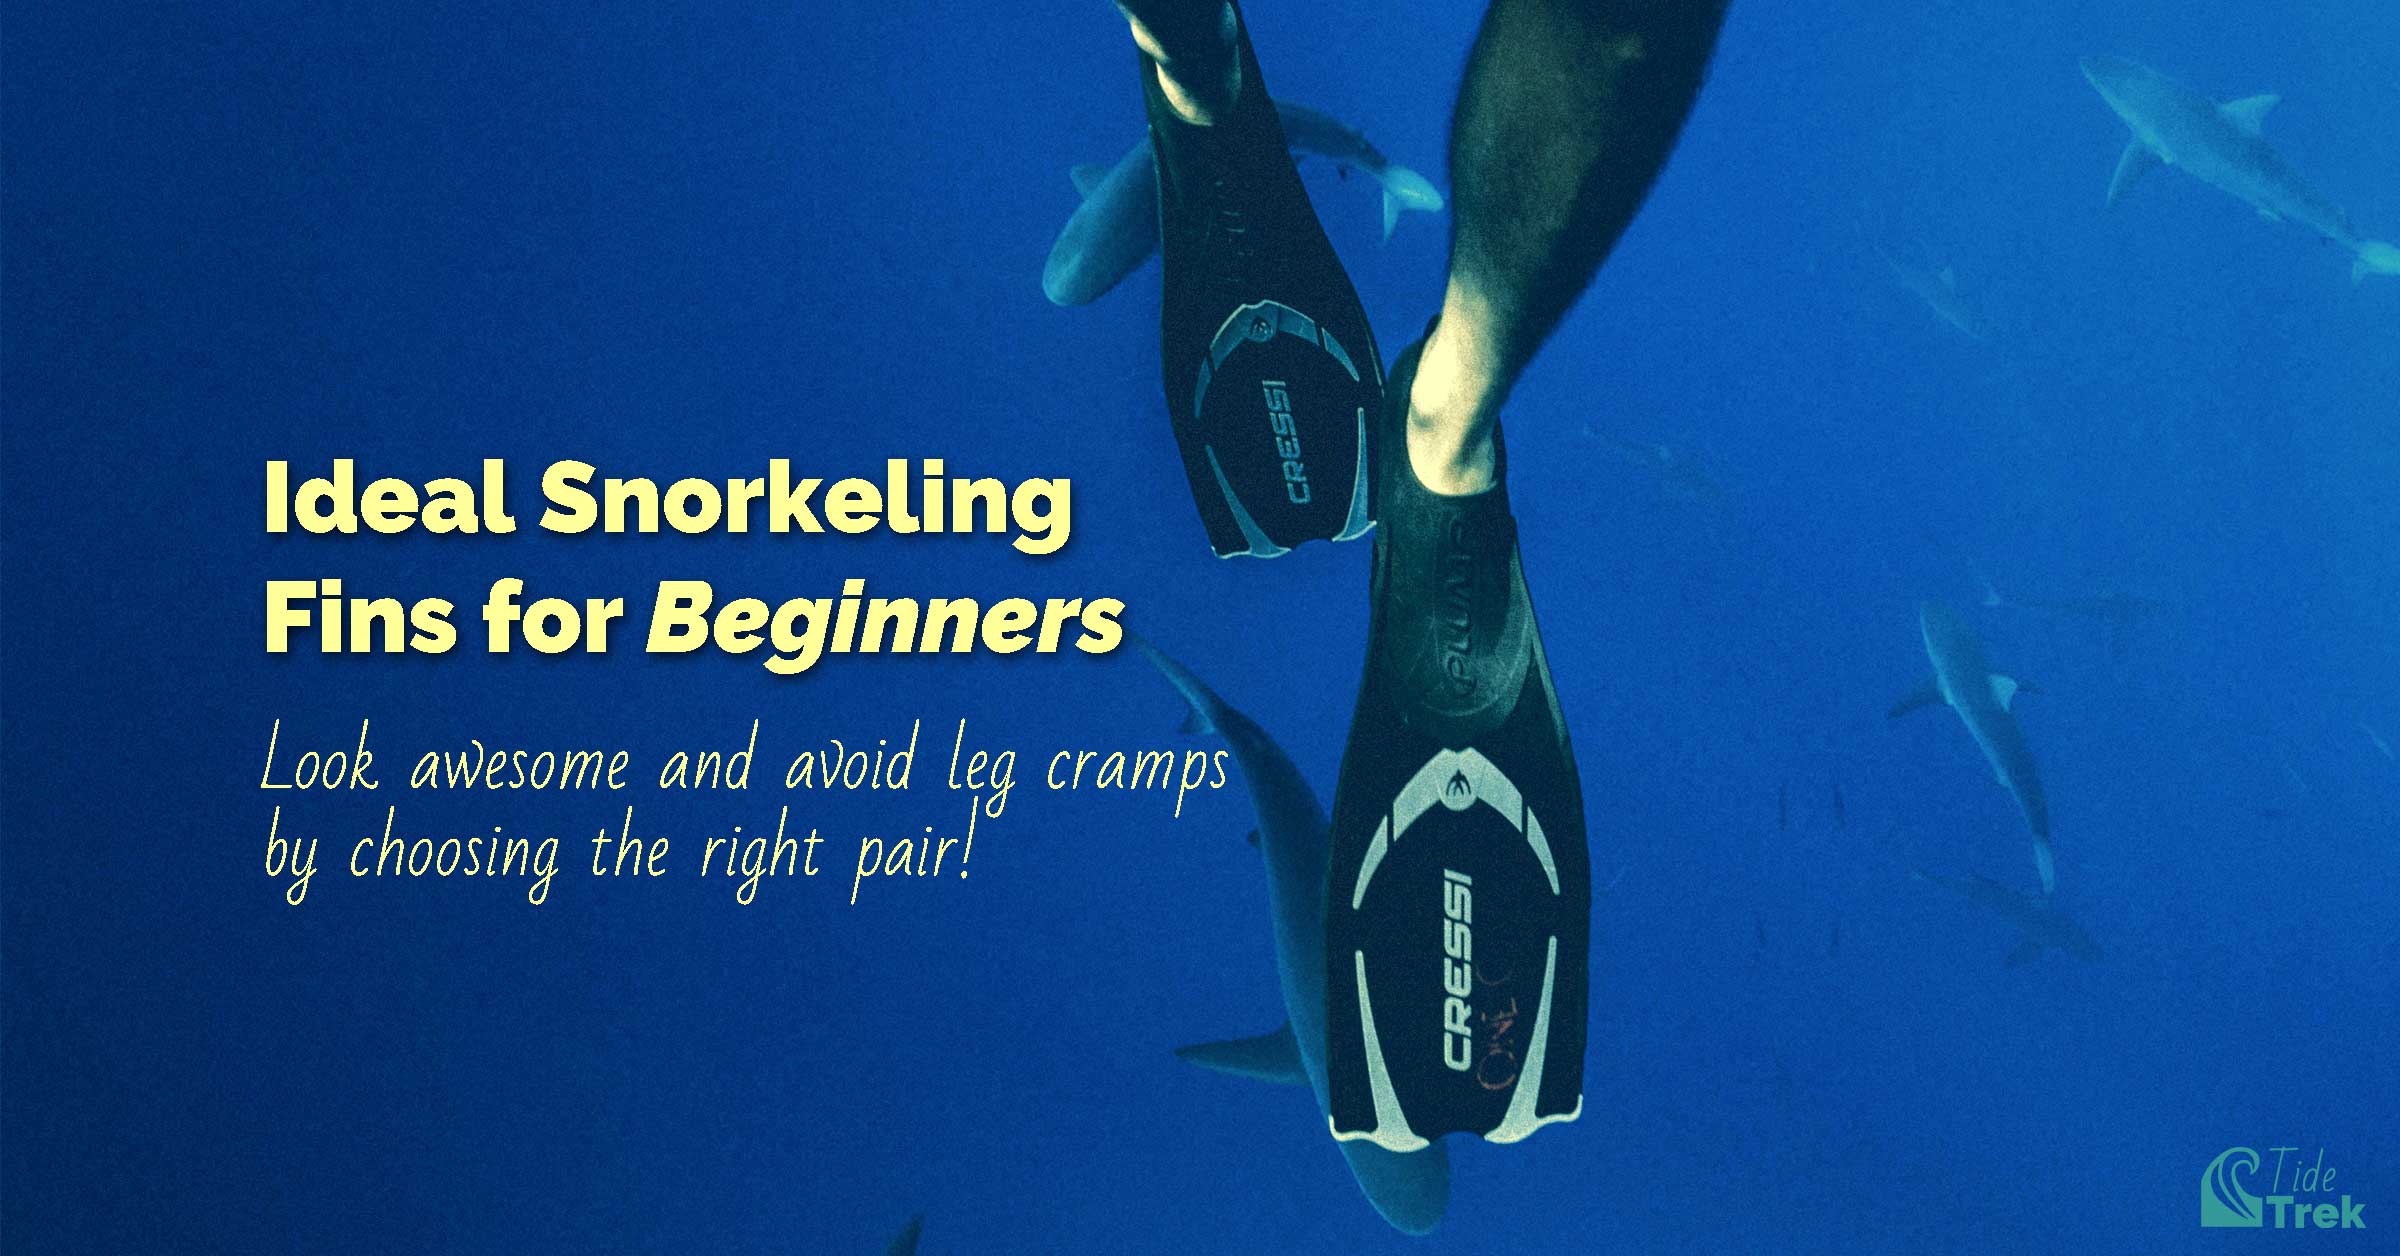 Ideal snorkeling fins for beginners. Photo shows a person's feet wearing fins underwater with sharks behind.